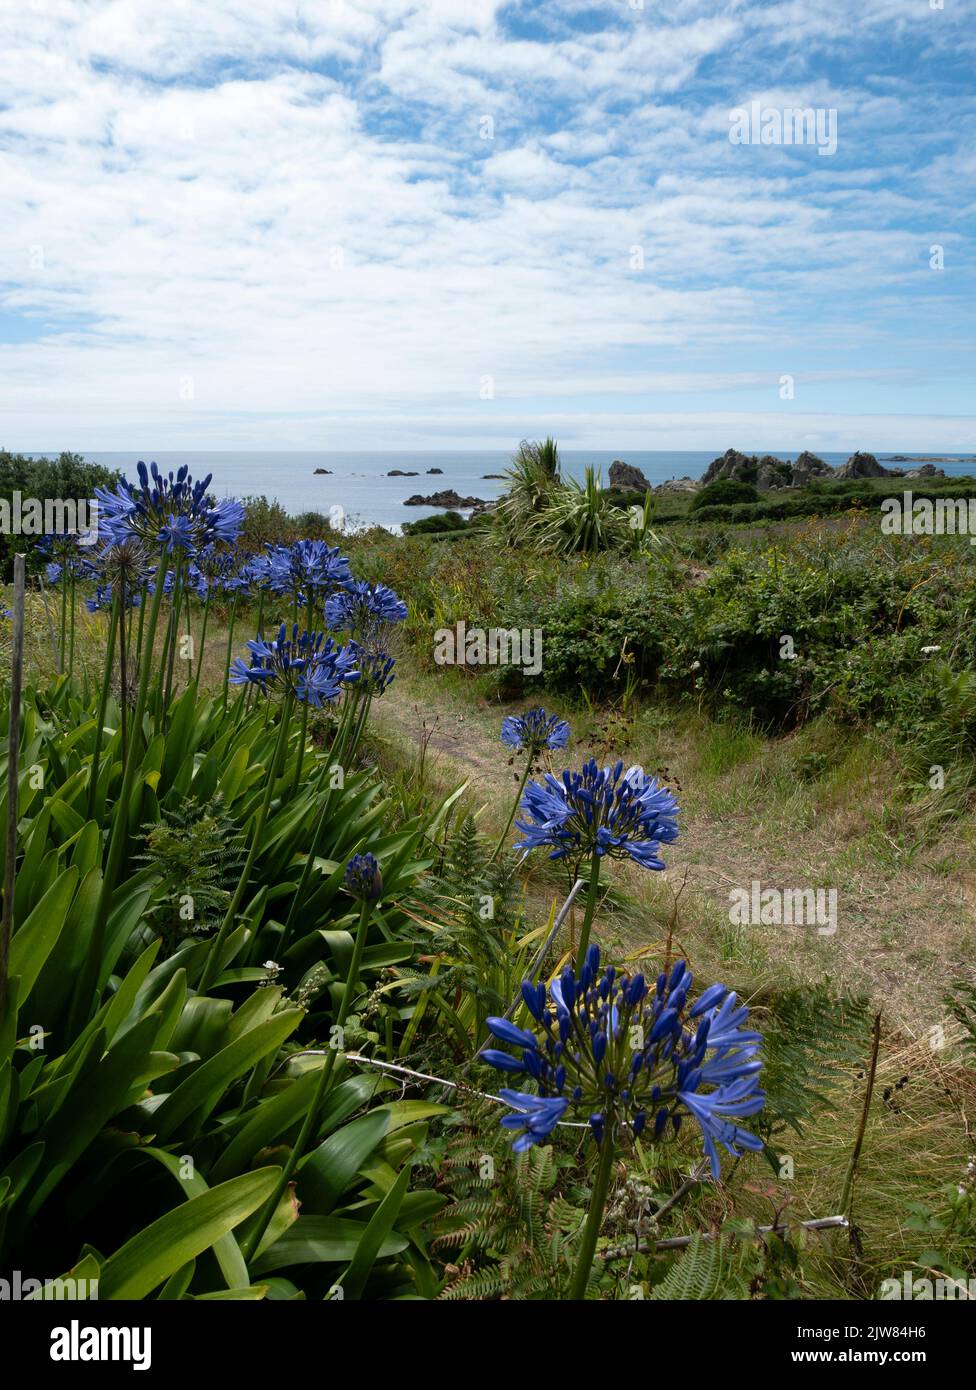 St Agnes, Isles of Scilly, Cornwall, England, UK. Stock Photo